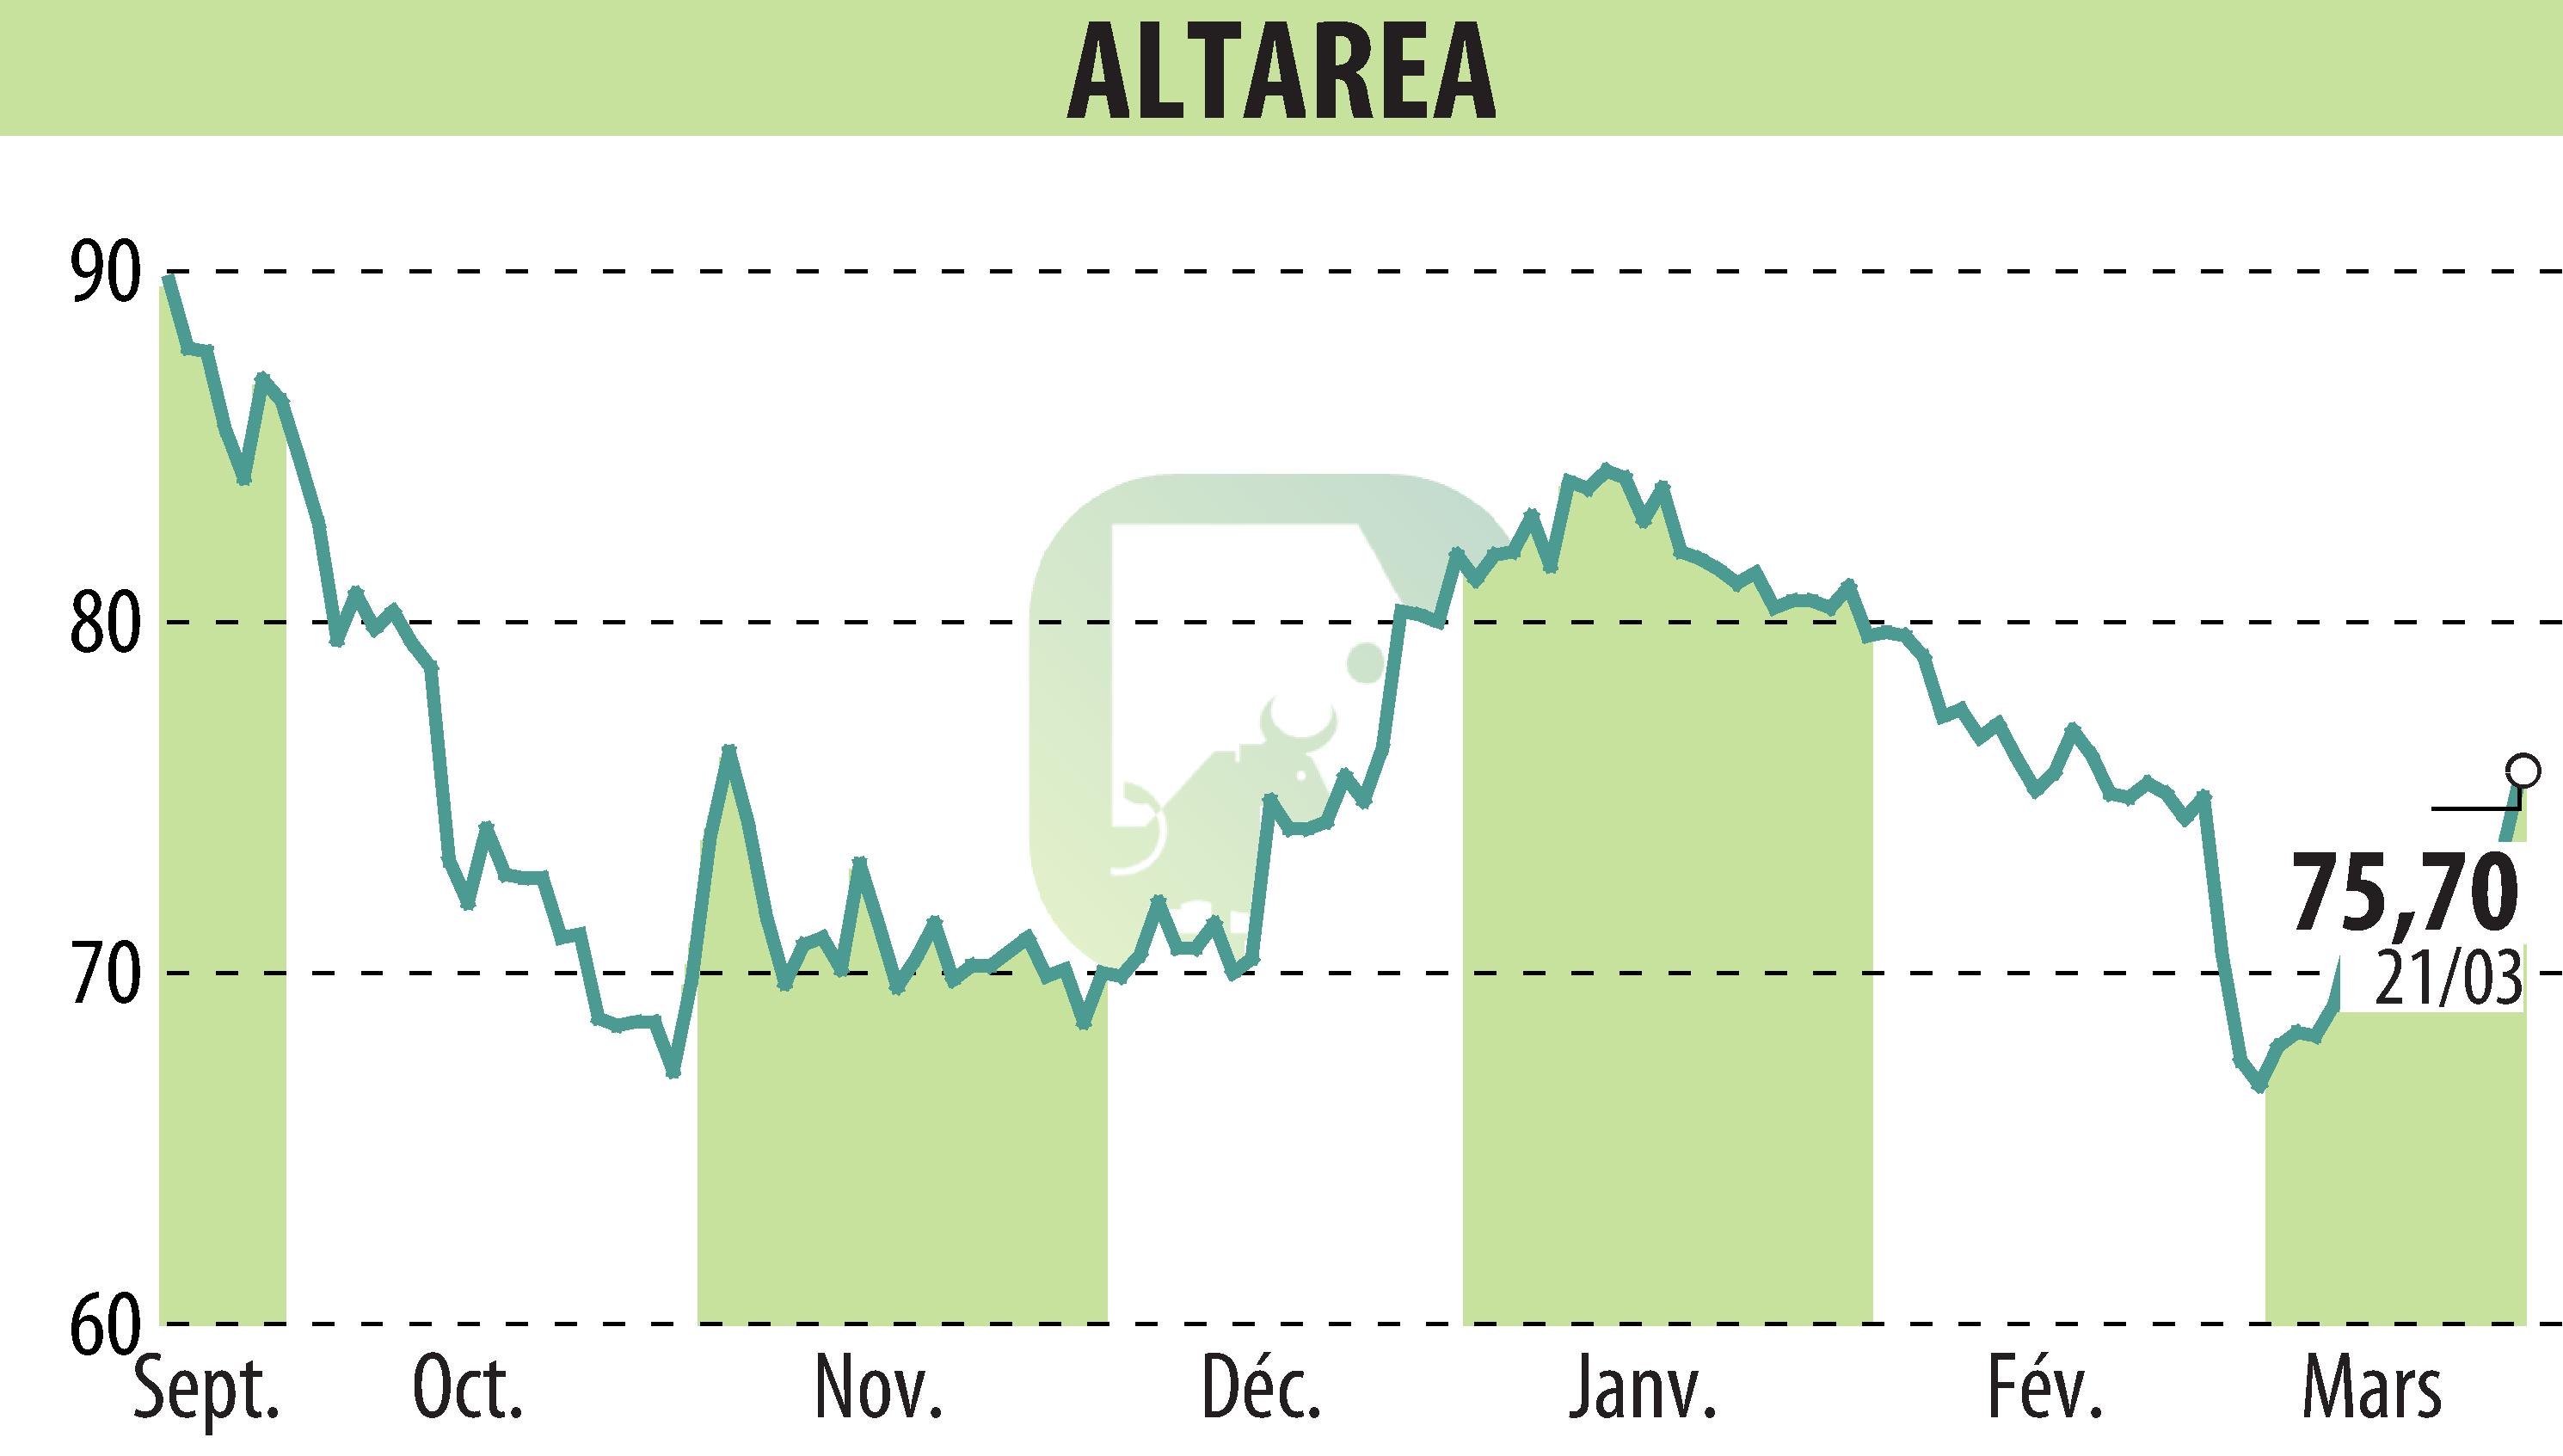 Stock price chart of ALTAREA (EPA:ALTA) showing fluctuations.